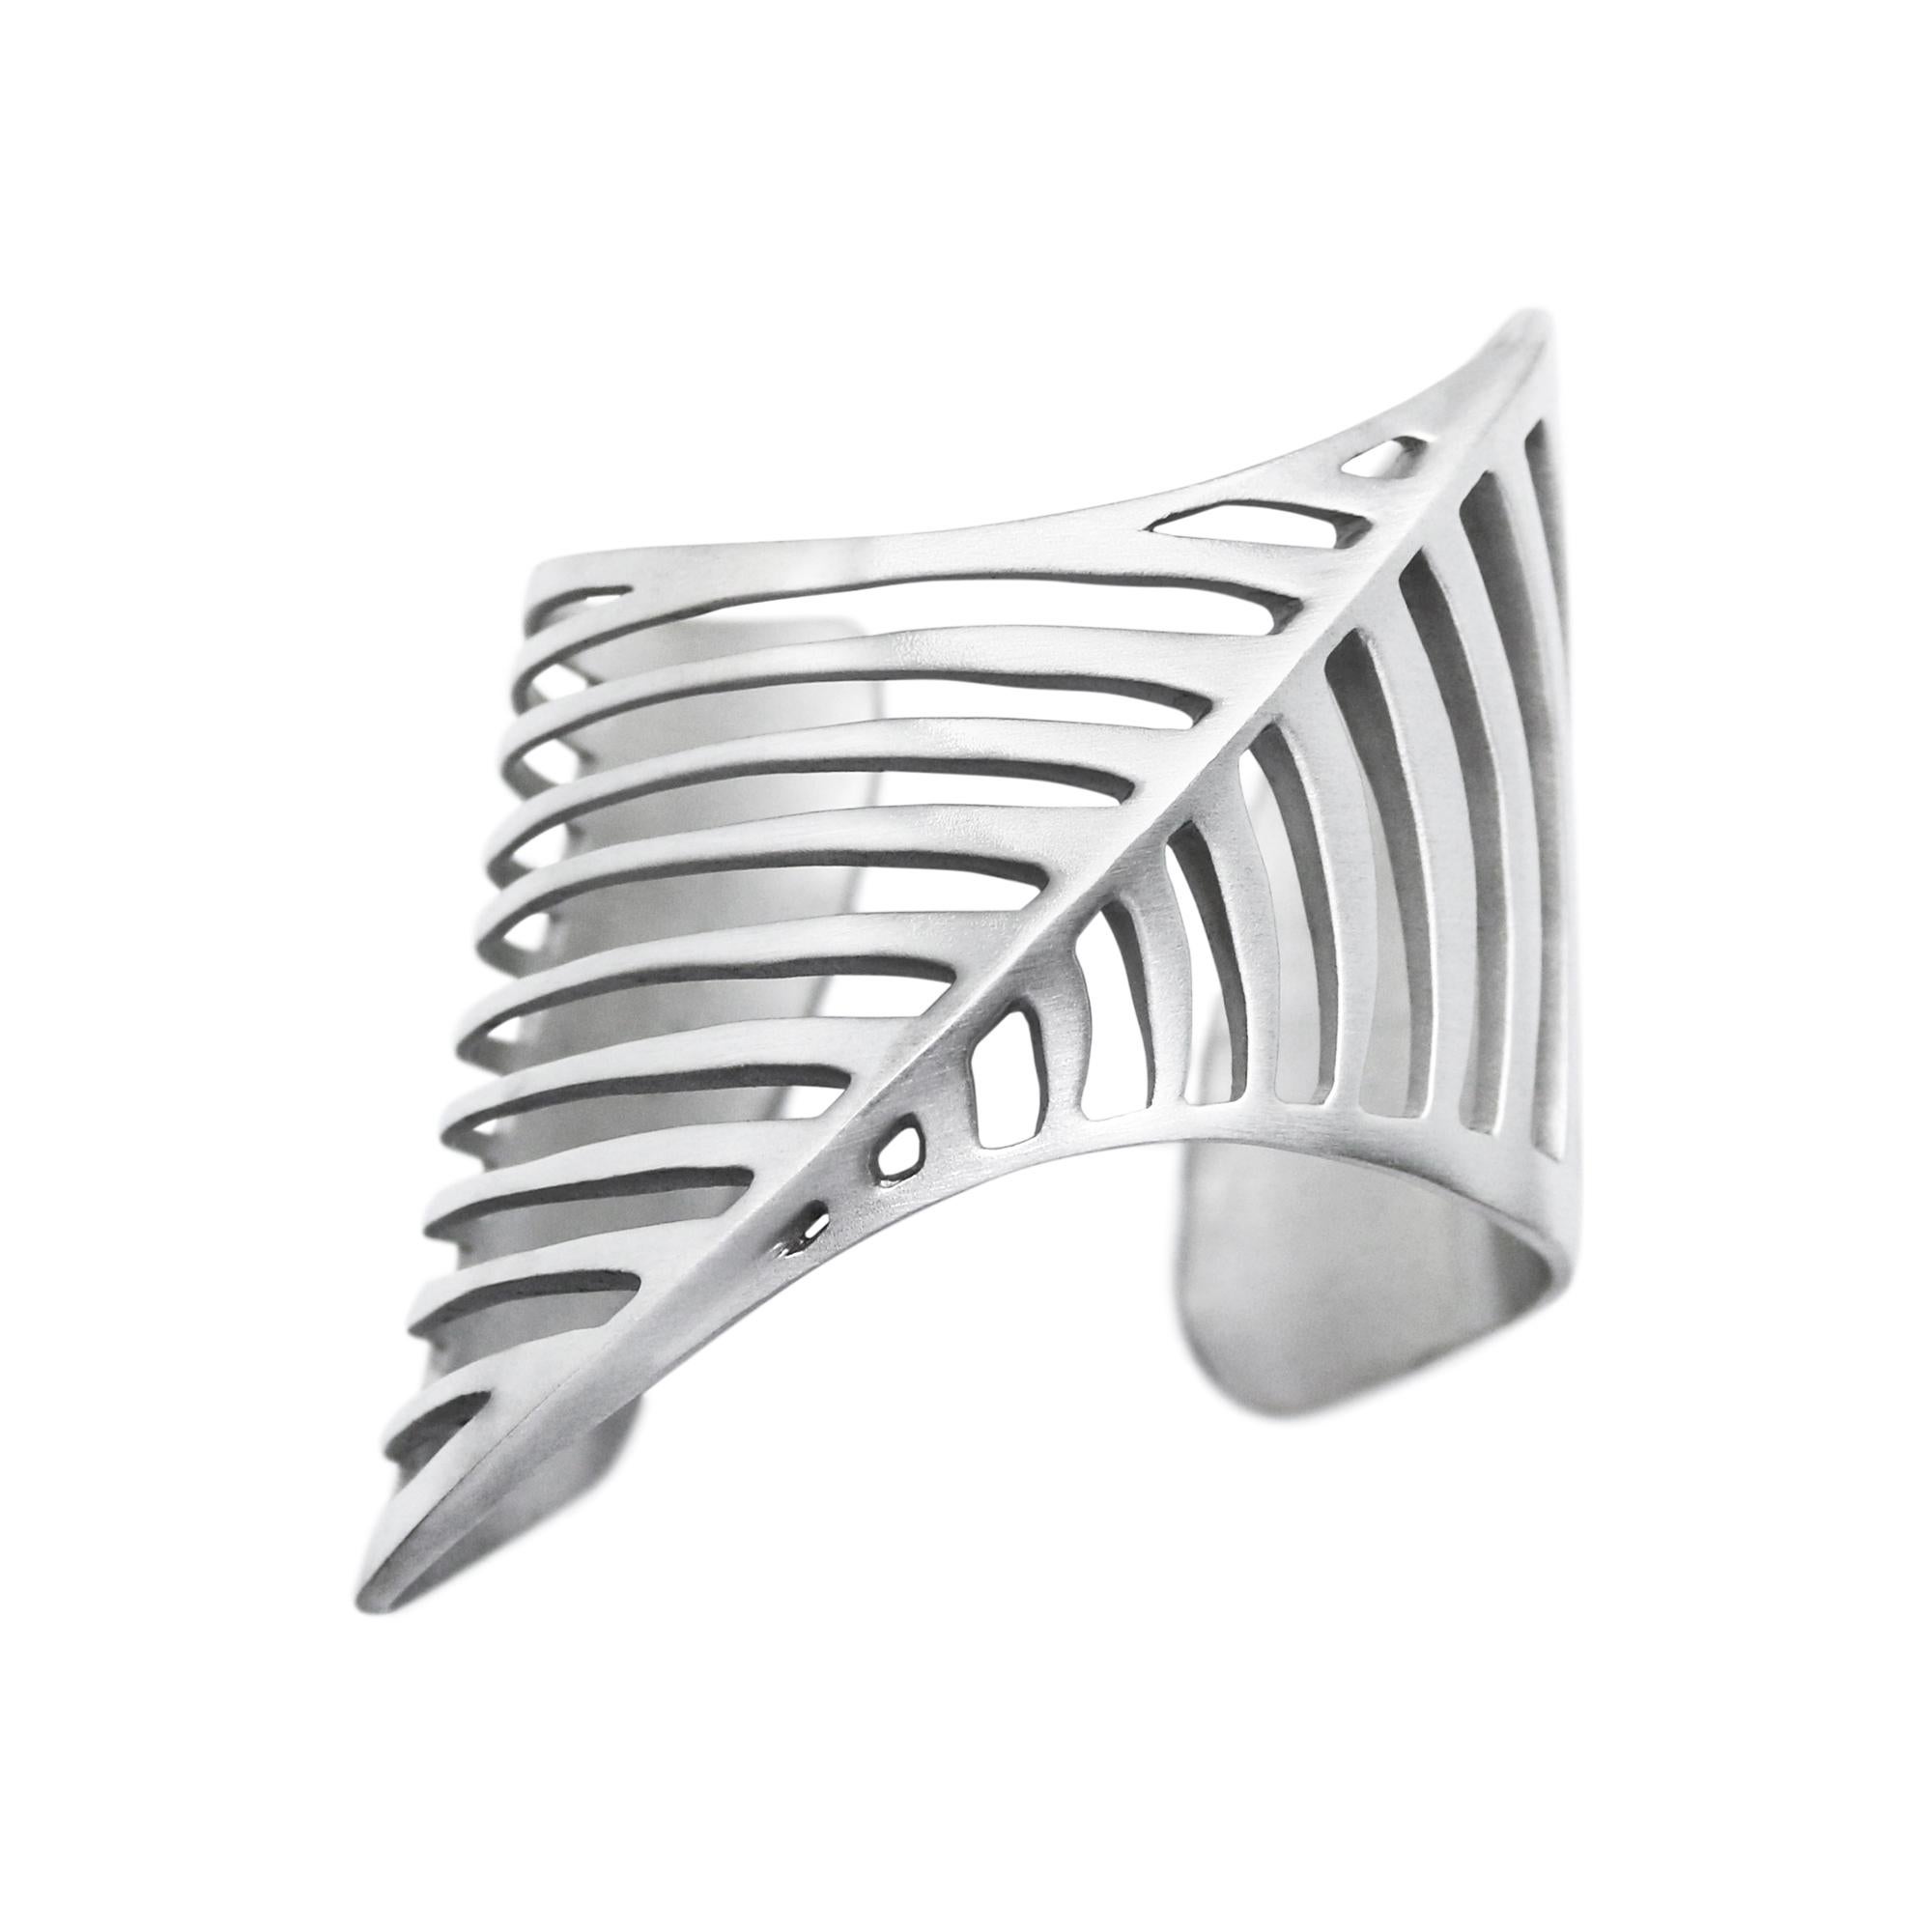 The design is inspired by a fusion of a modernist-futurist architecture from the 1970s and the body of the shark, predator of the ocean. It has cuts in an abstract fishbone pattern.
Shaped to perfectly embrace your wrist. It can be worn as low or as